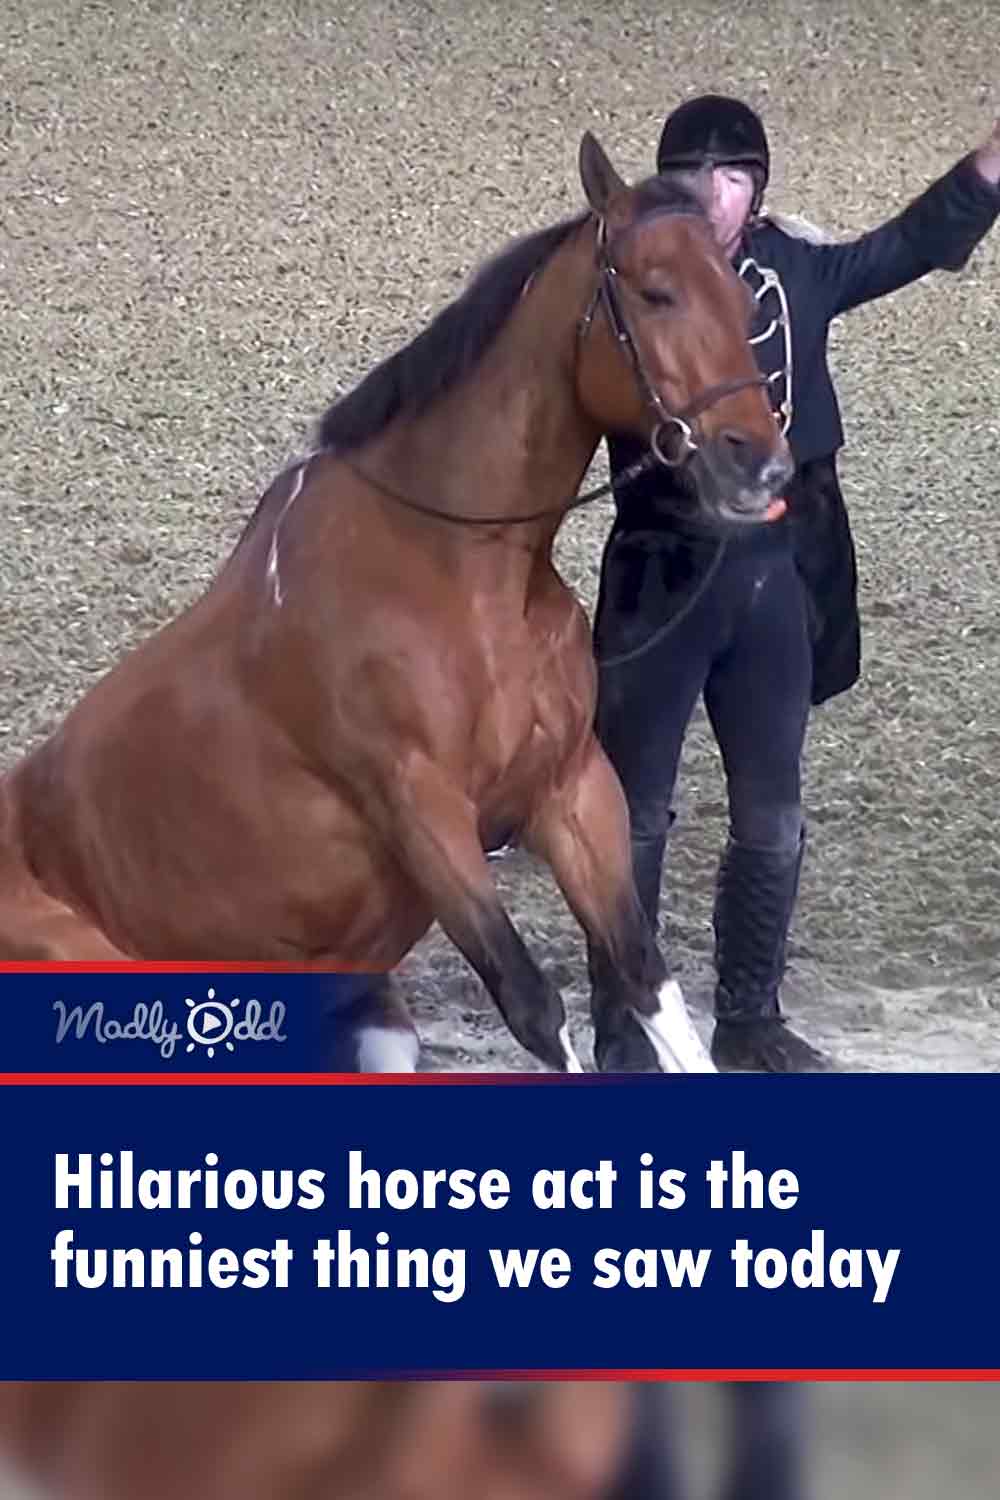 Hilarious horse act is the funniest thing we saw today